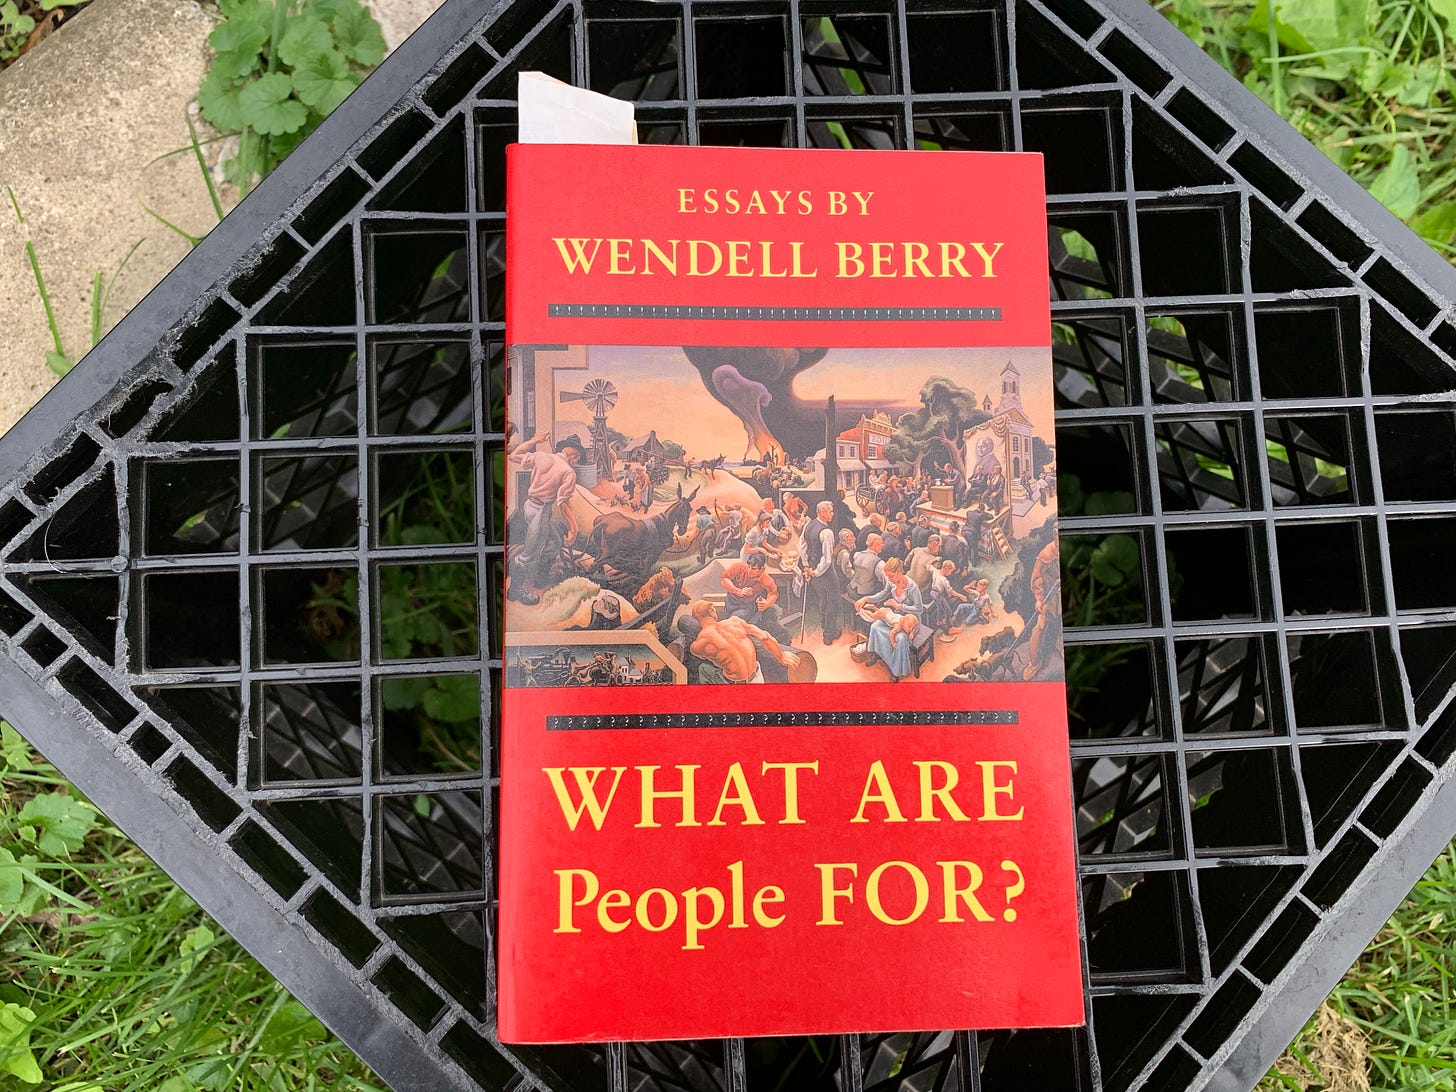 A milk crate with Wendell Berry's "What Are People FOR?" on top